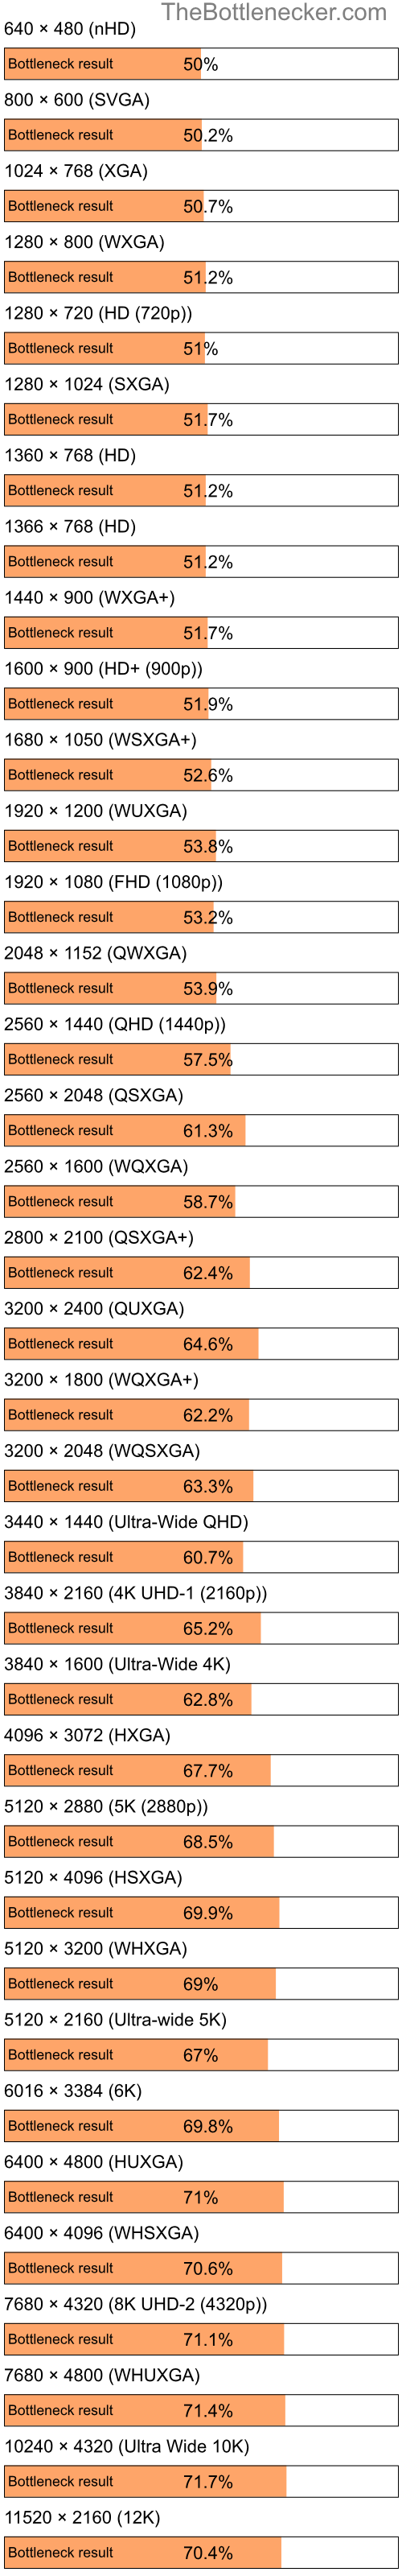 Bottleneck results by resolution for Intel Pentium 4 and NVIDIA GeForce 7500 LE in Processor Intense Tasks